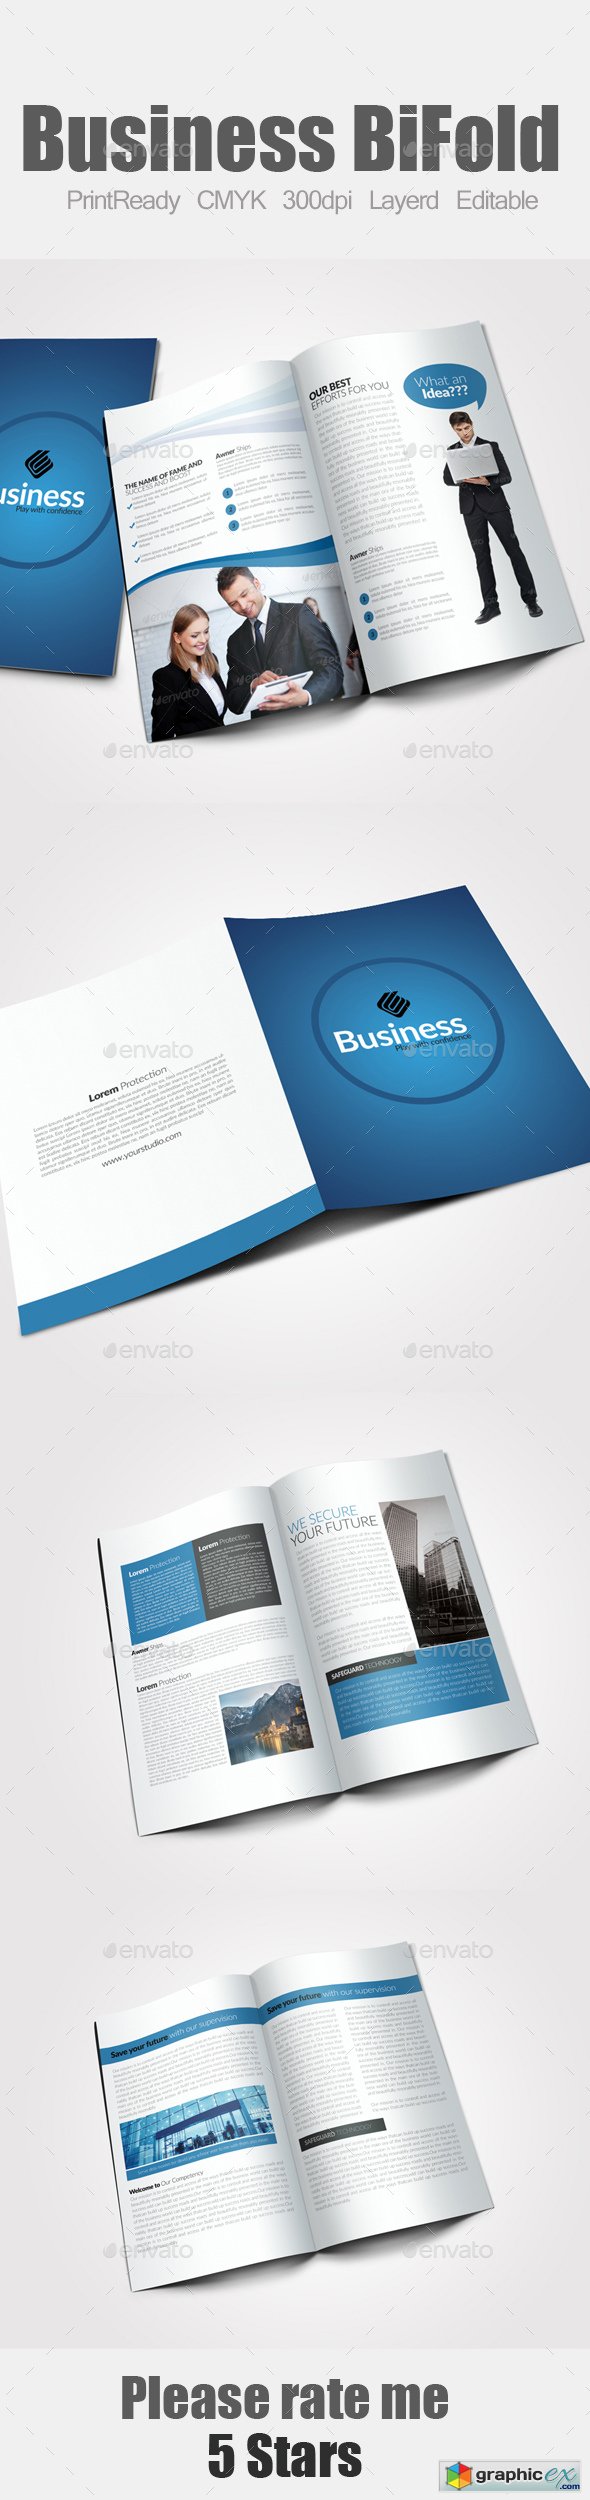 8 Pages Business Bifold Brochure